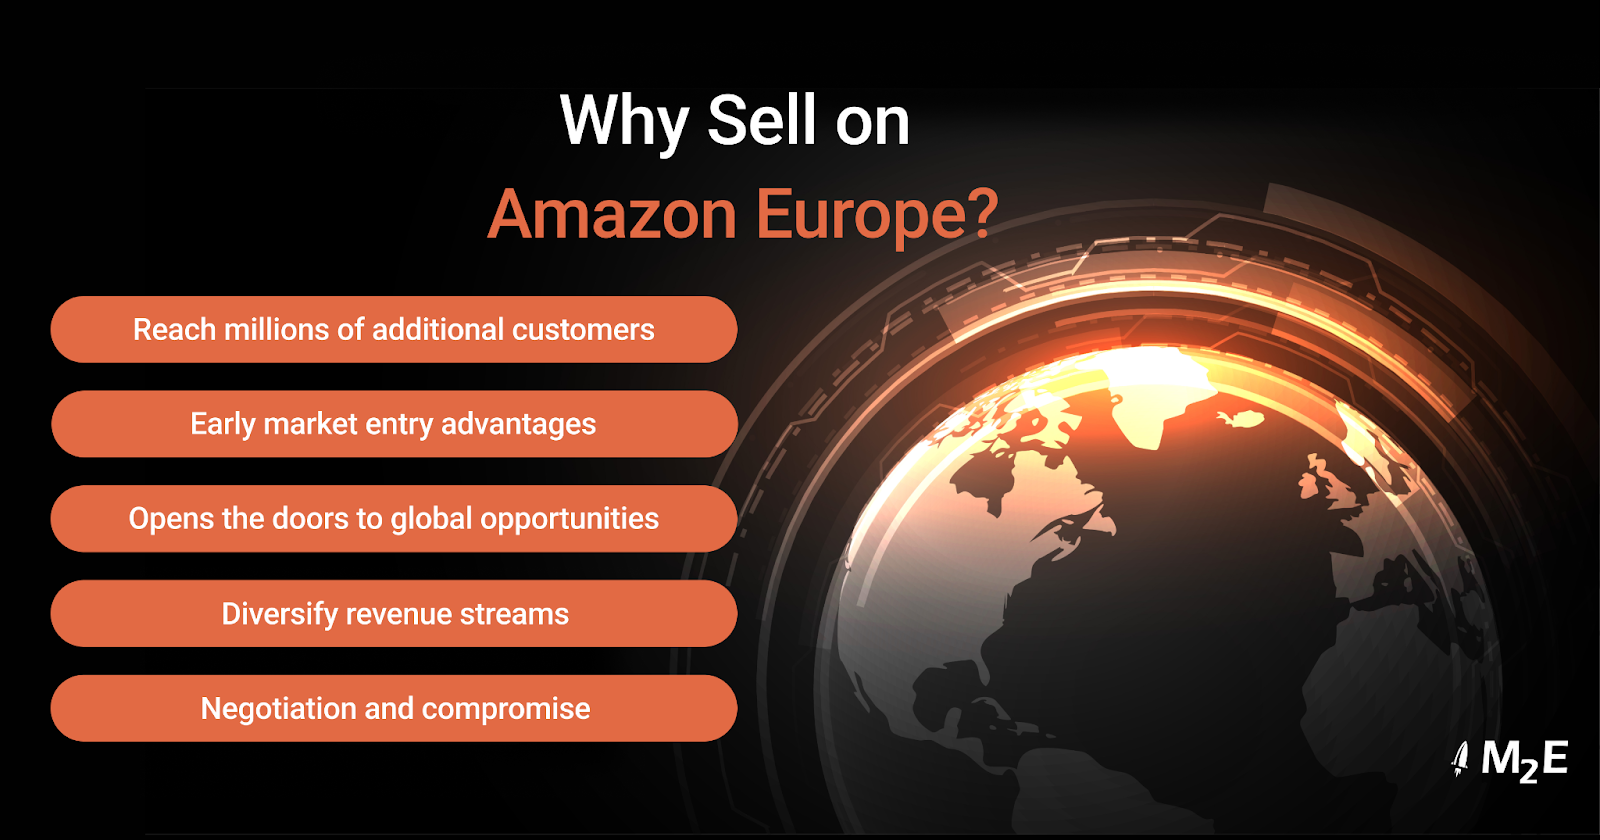 Why Sell on Amazon Europe?